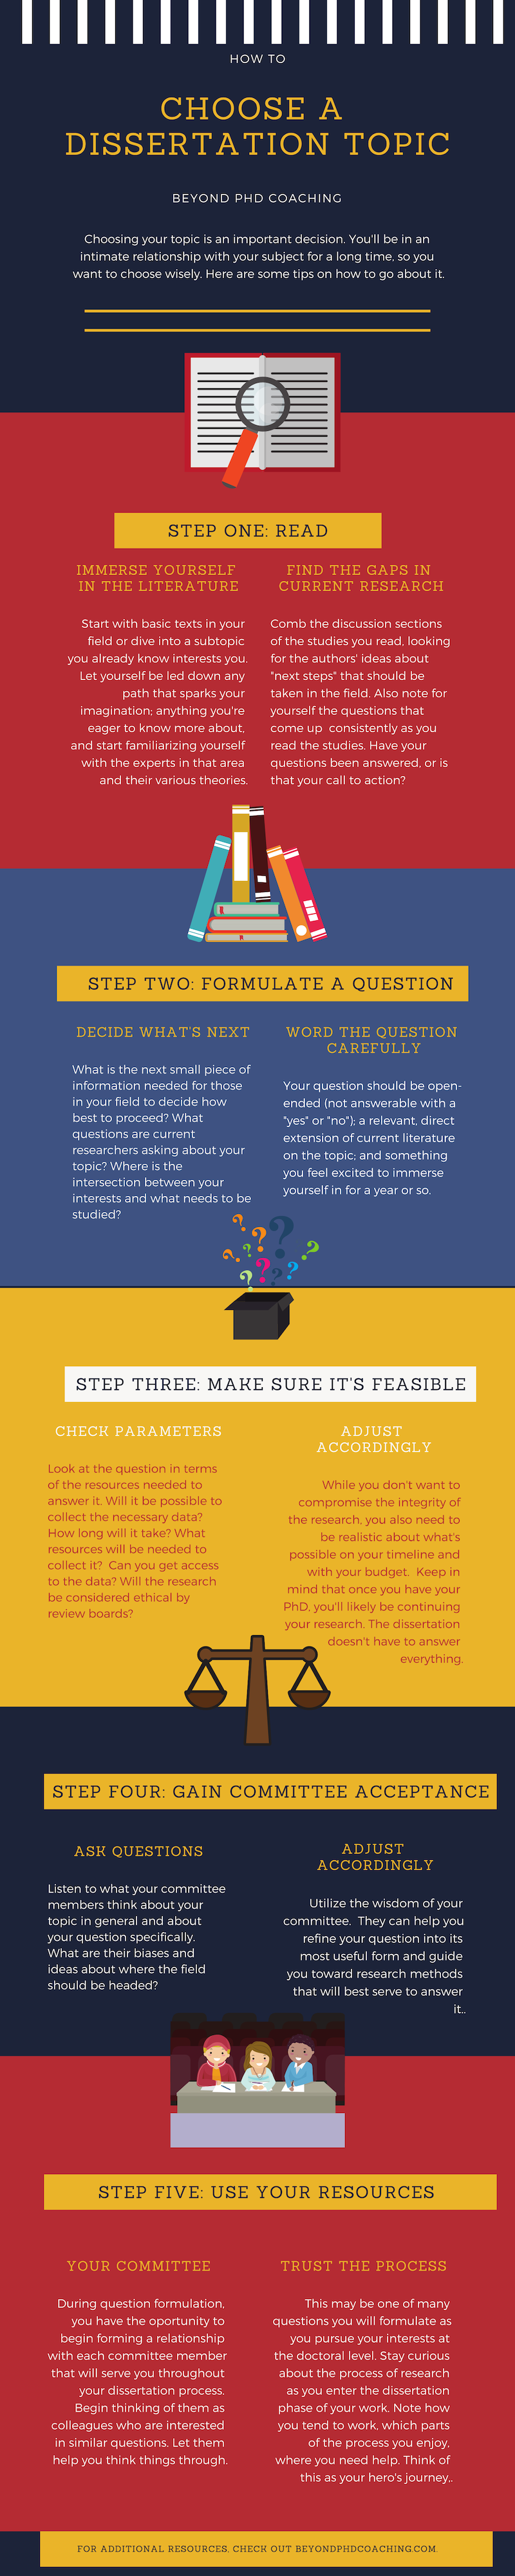 Infographic explaining How to Choose a Dissertation Topic 